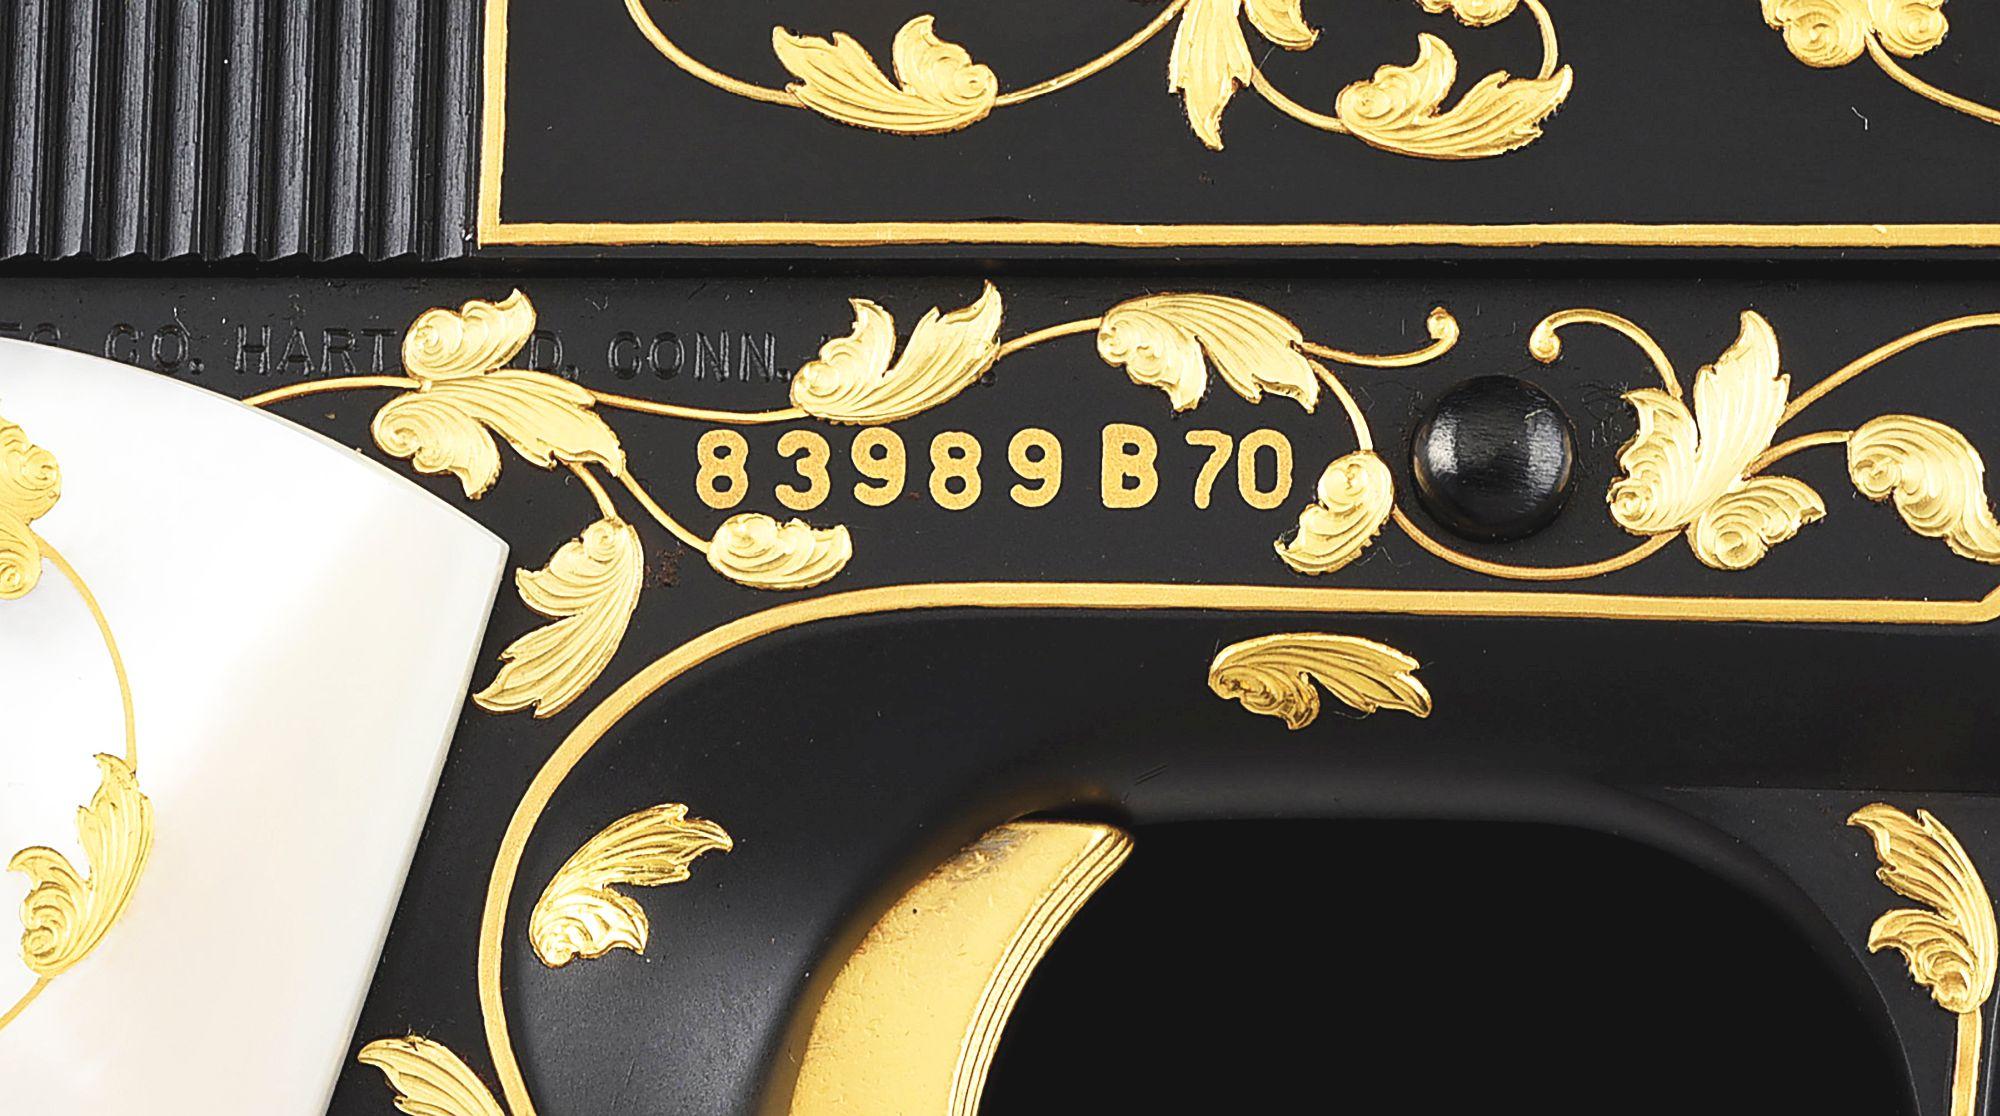 (C) BARRY LEE HANDS MASTER ENGRAVED AND GOLD INLAID COLT 1911A1 SEMI AUTOMATIC PISTOL.